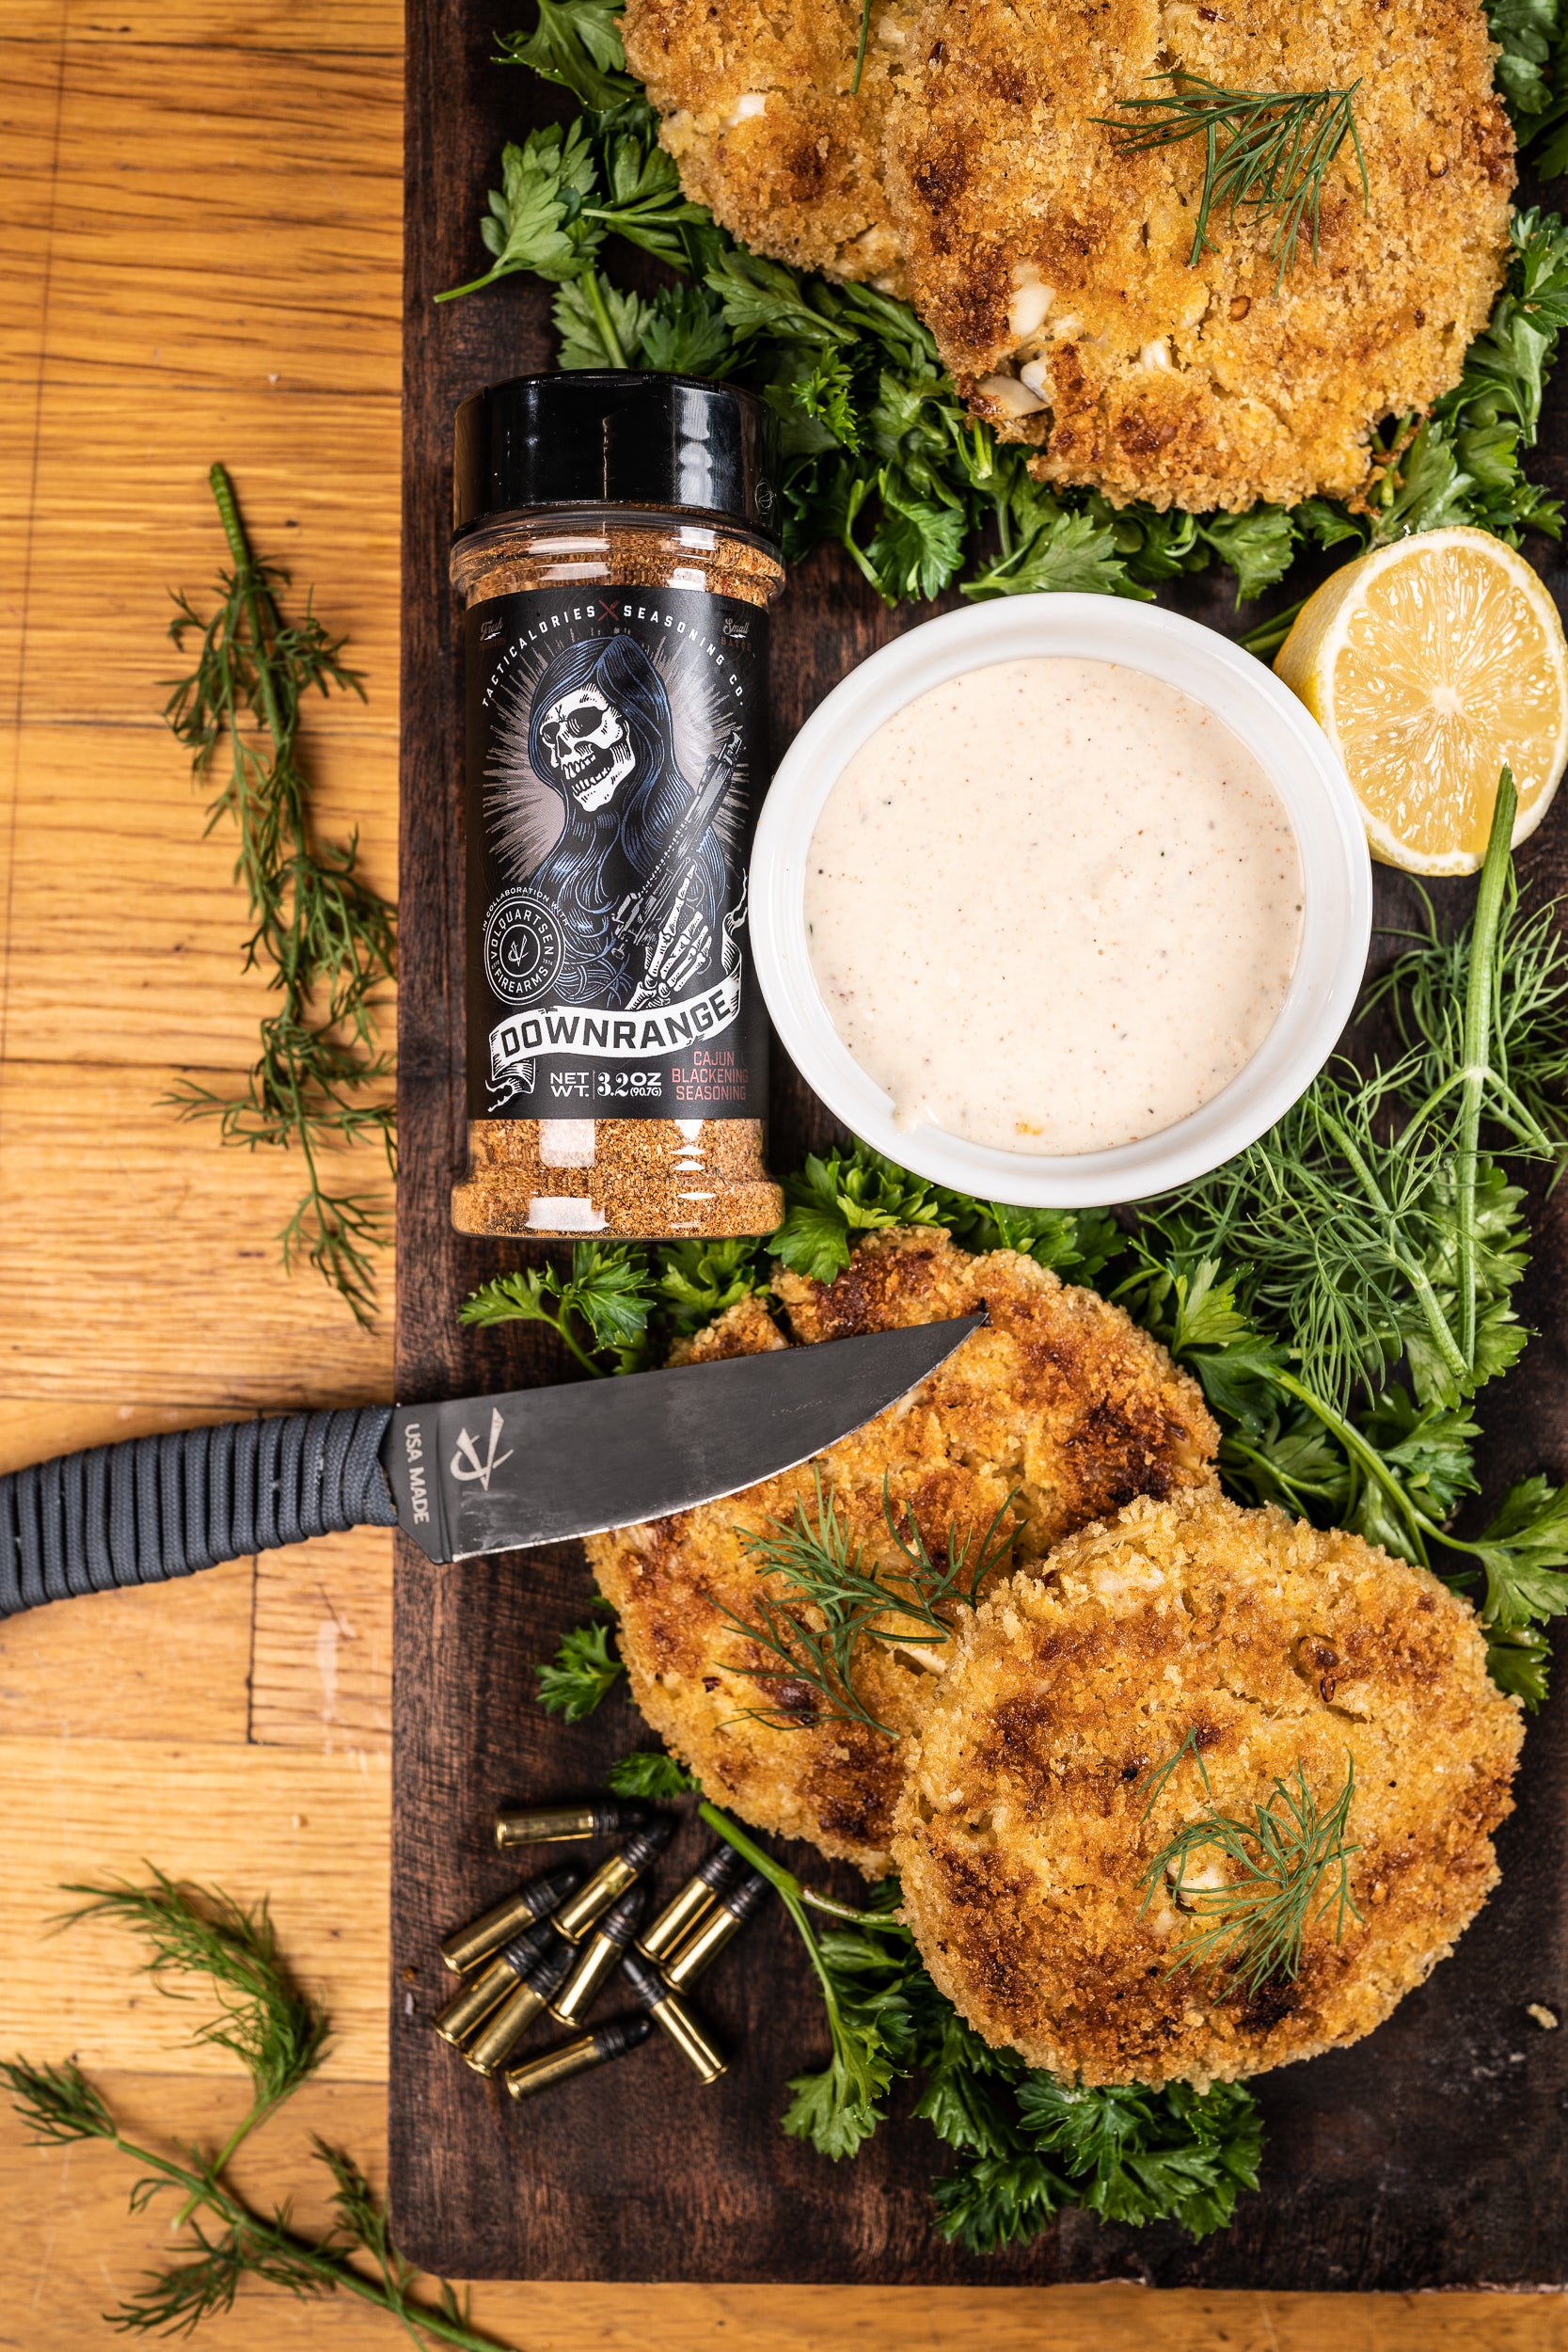 DOWN RANGE Cajun Crab Cakes with Remoulade